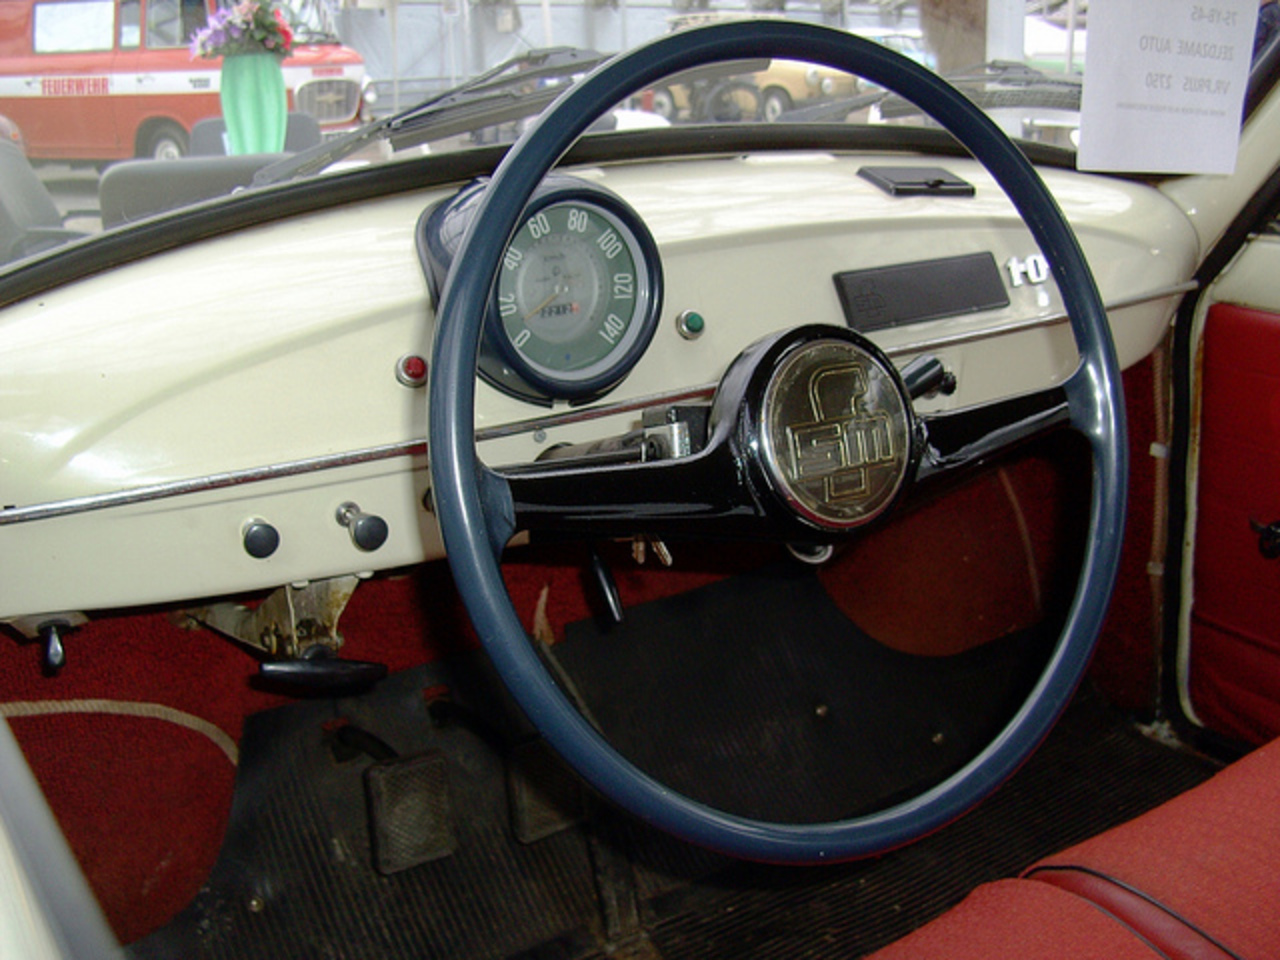 1976 FSM Syrena 105, dashboard and steering wheel | Flickr - Photo ...